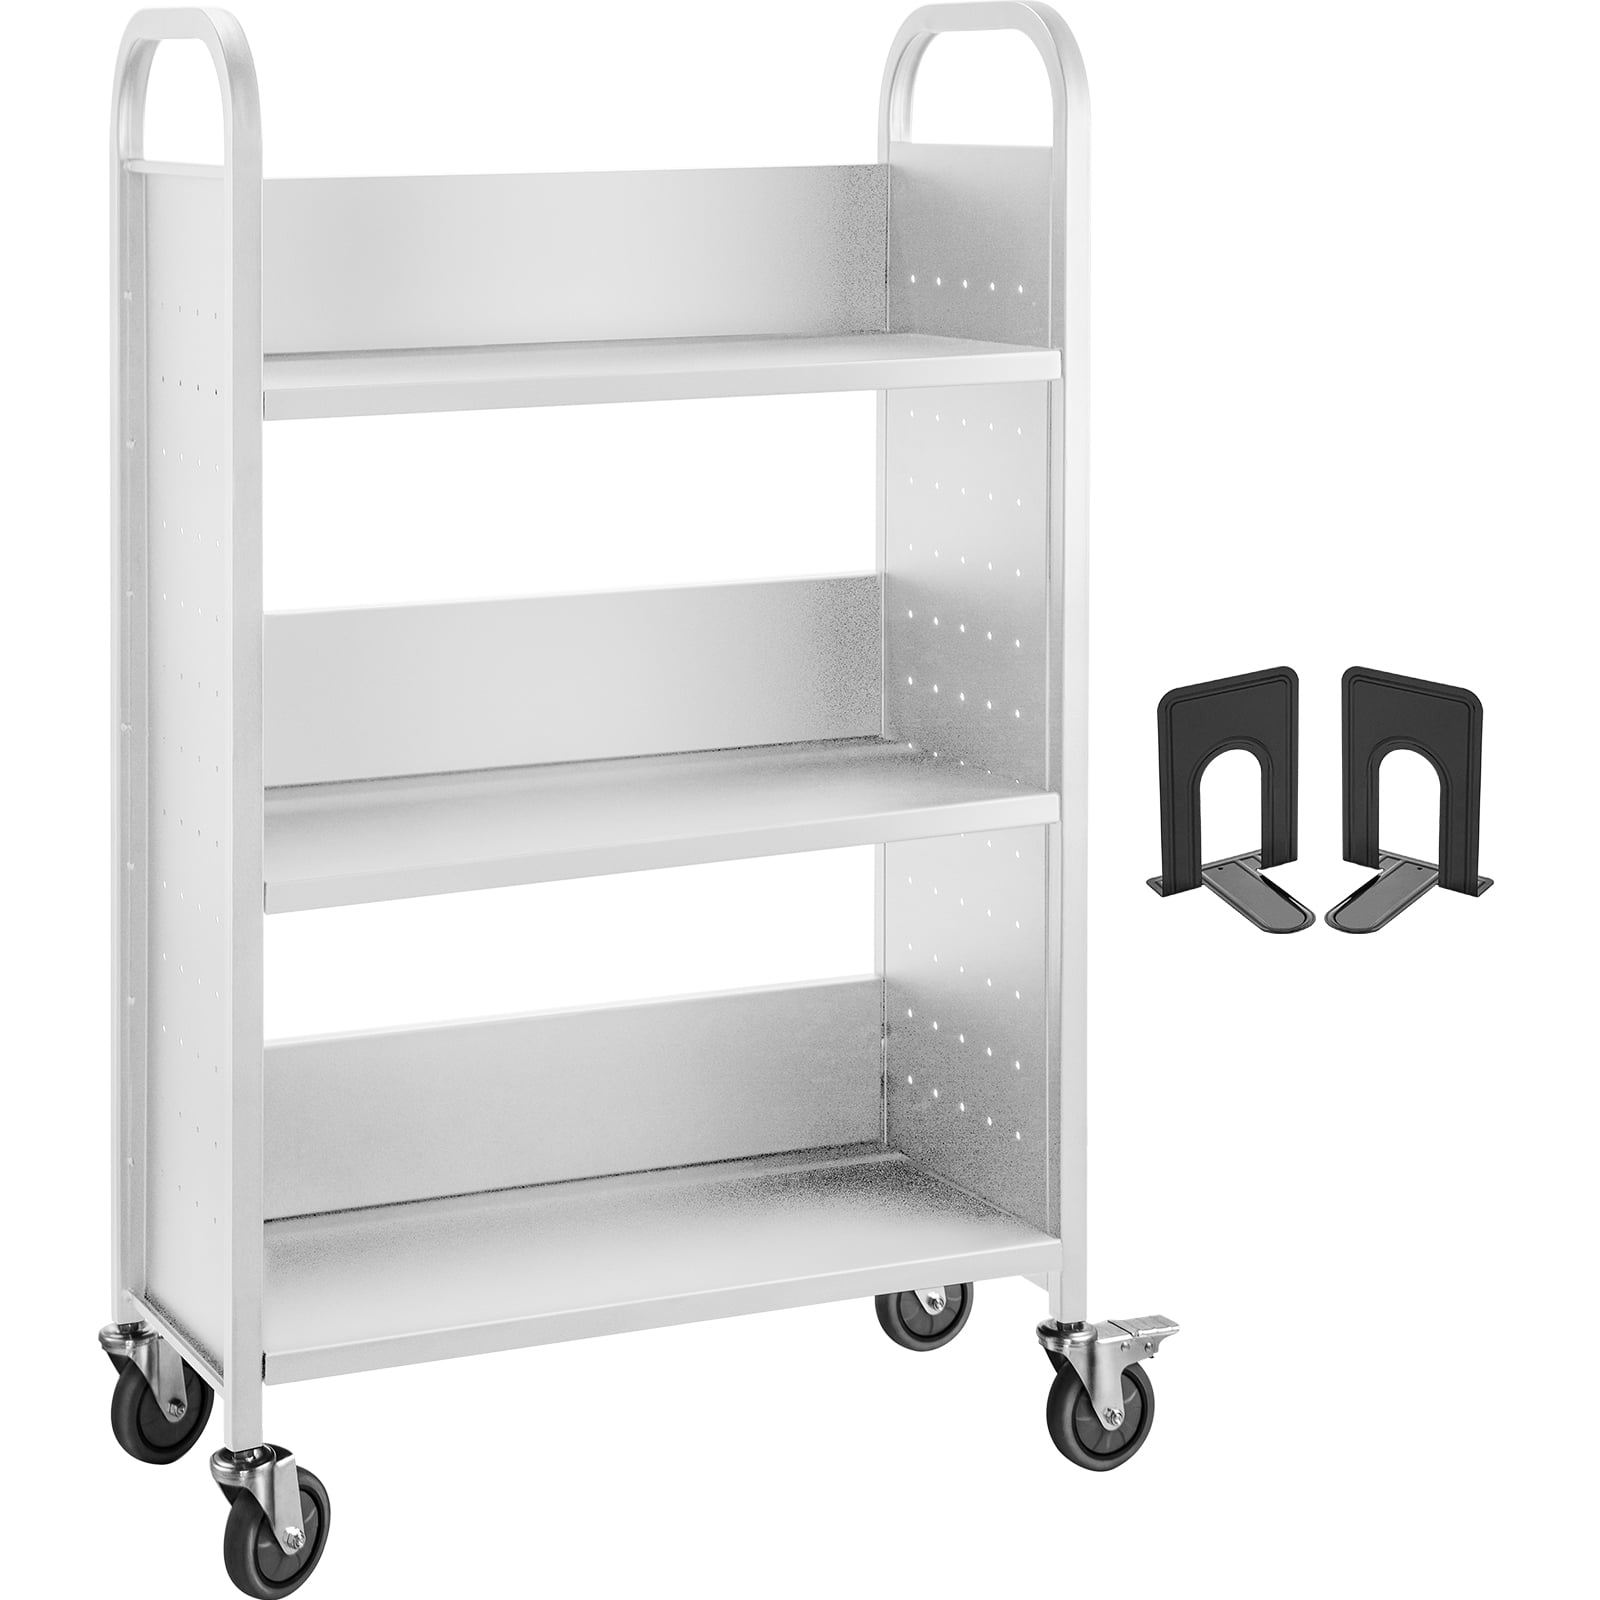 Office Files Arrangement Storage Organizer Cart Home OFFICEJOY 4-Drawer Rolling Storage Cart Clear Craft Organizer with 4 Casters Multipurpose Mobile Rolling Utility Cart for School 